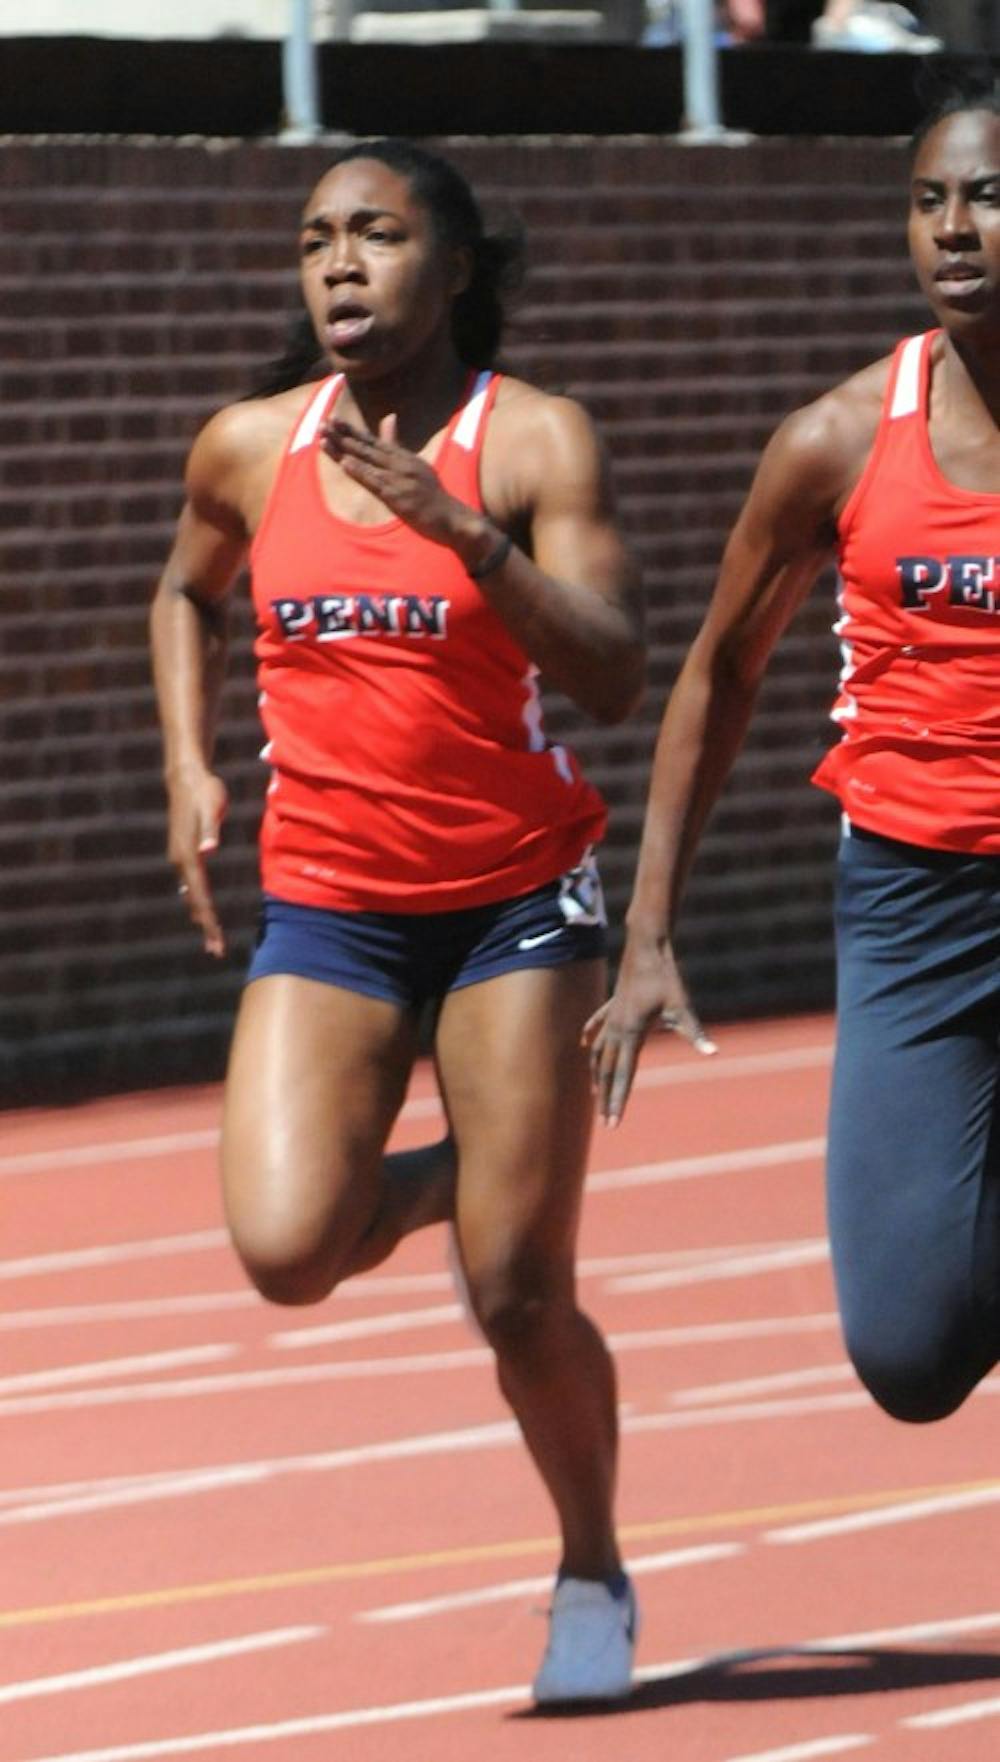 <p><strong>Senior sprinter Gabrielle Piper</strong> had a solid performance at Heptagonals, finishing as the runner-up in the 60 meter hurdles.</p><hr />